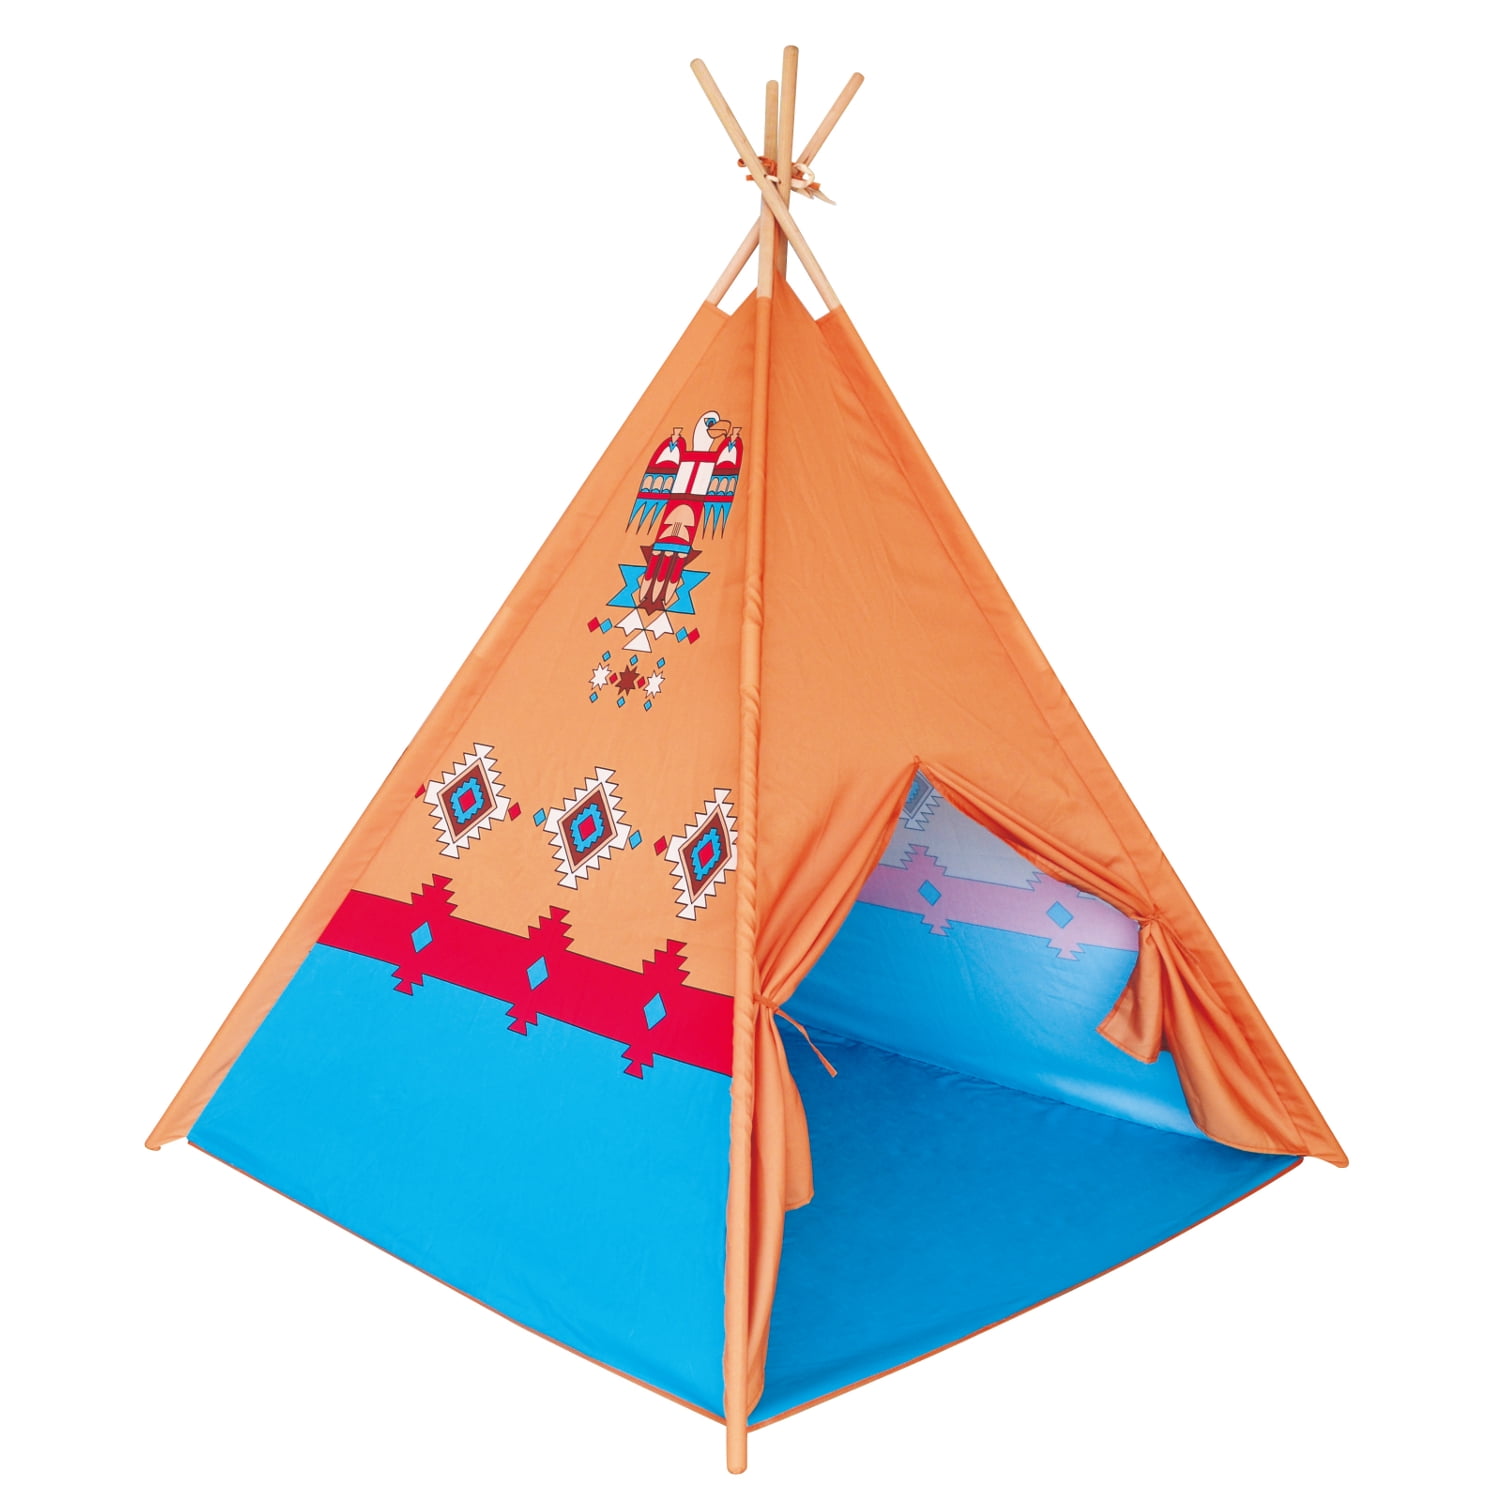 Childrens Kids TeePee Red Indian Wigwam Play Tent Playhouse Camp Indoor Outdoor 